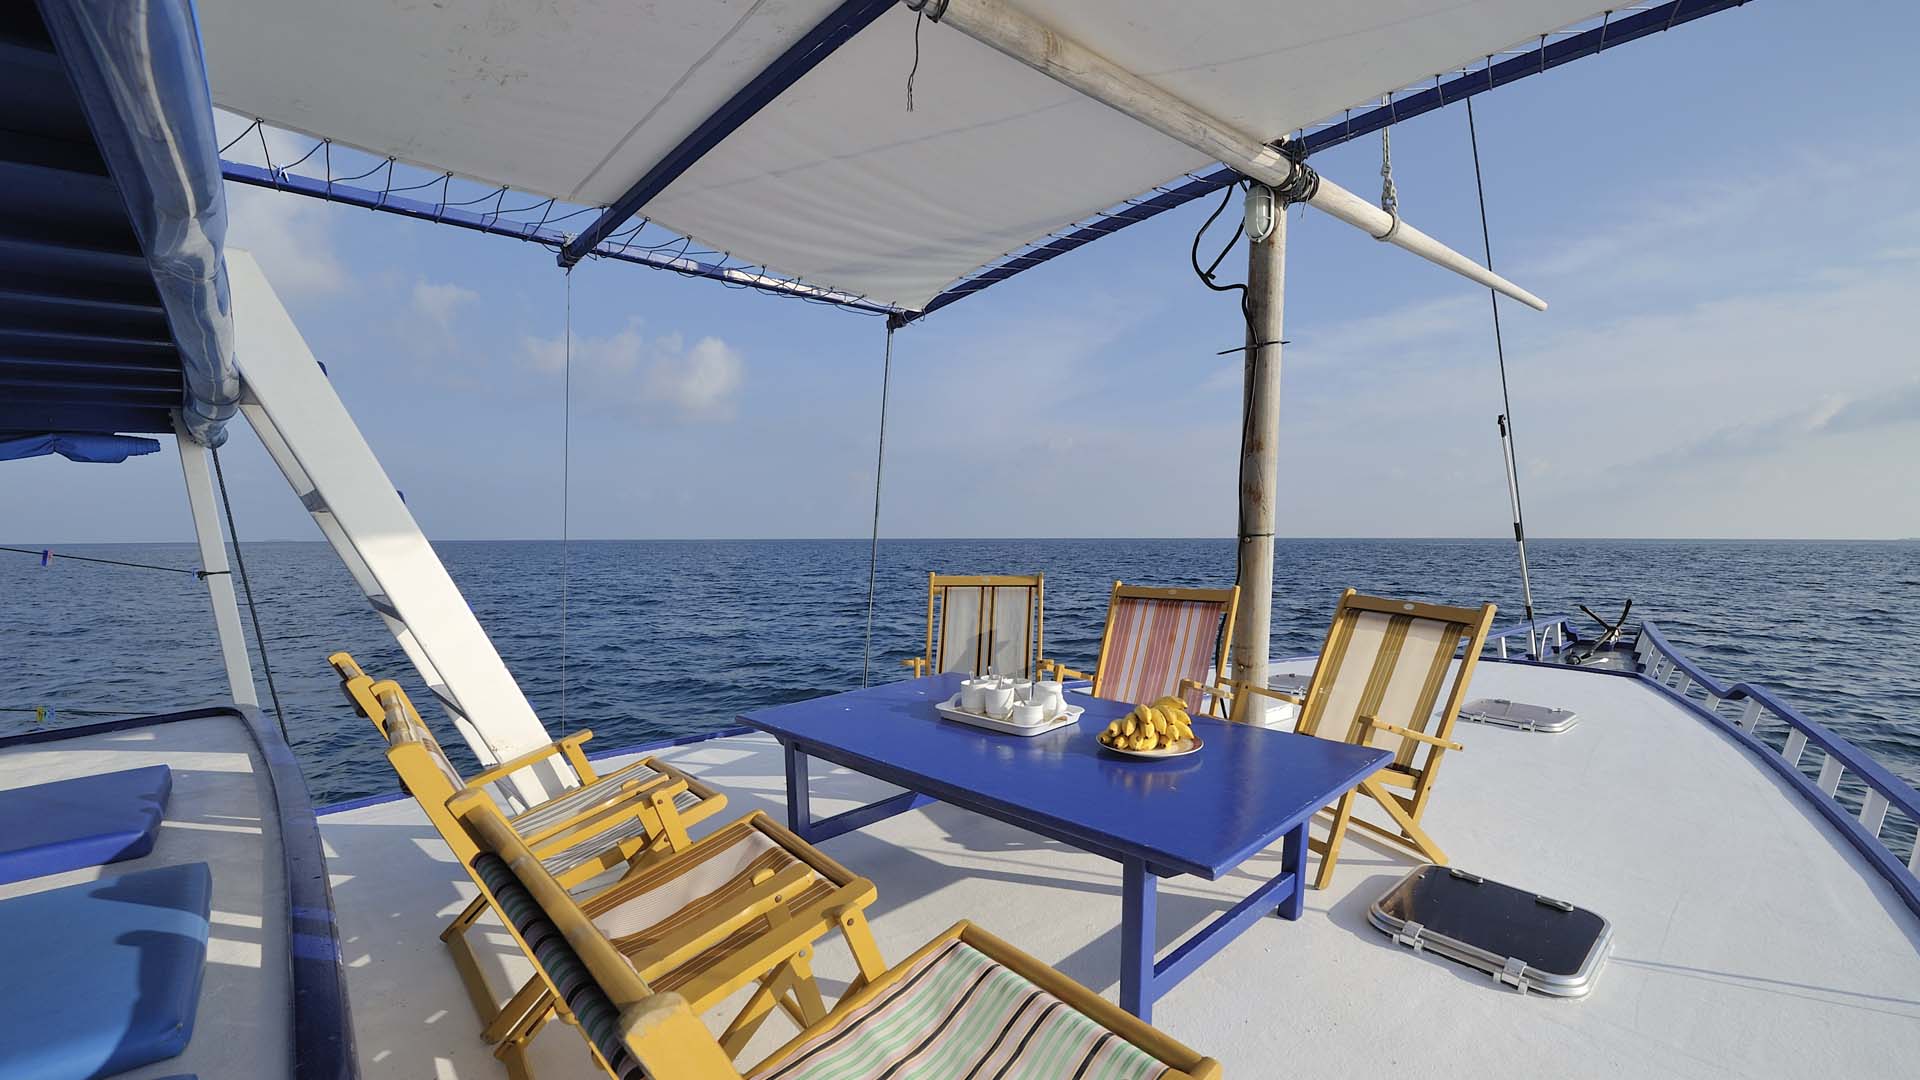 Time for a drink on the Sea Coral Surf Charter